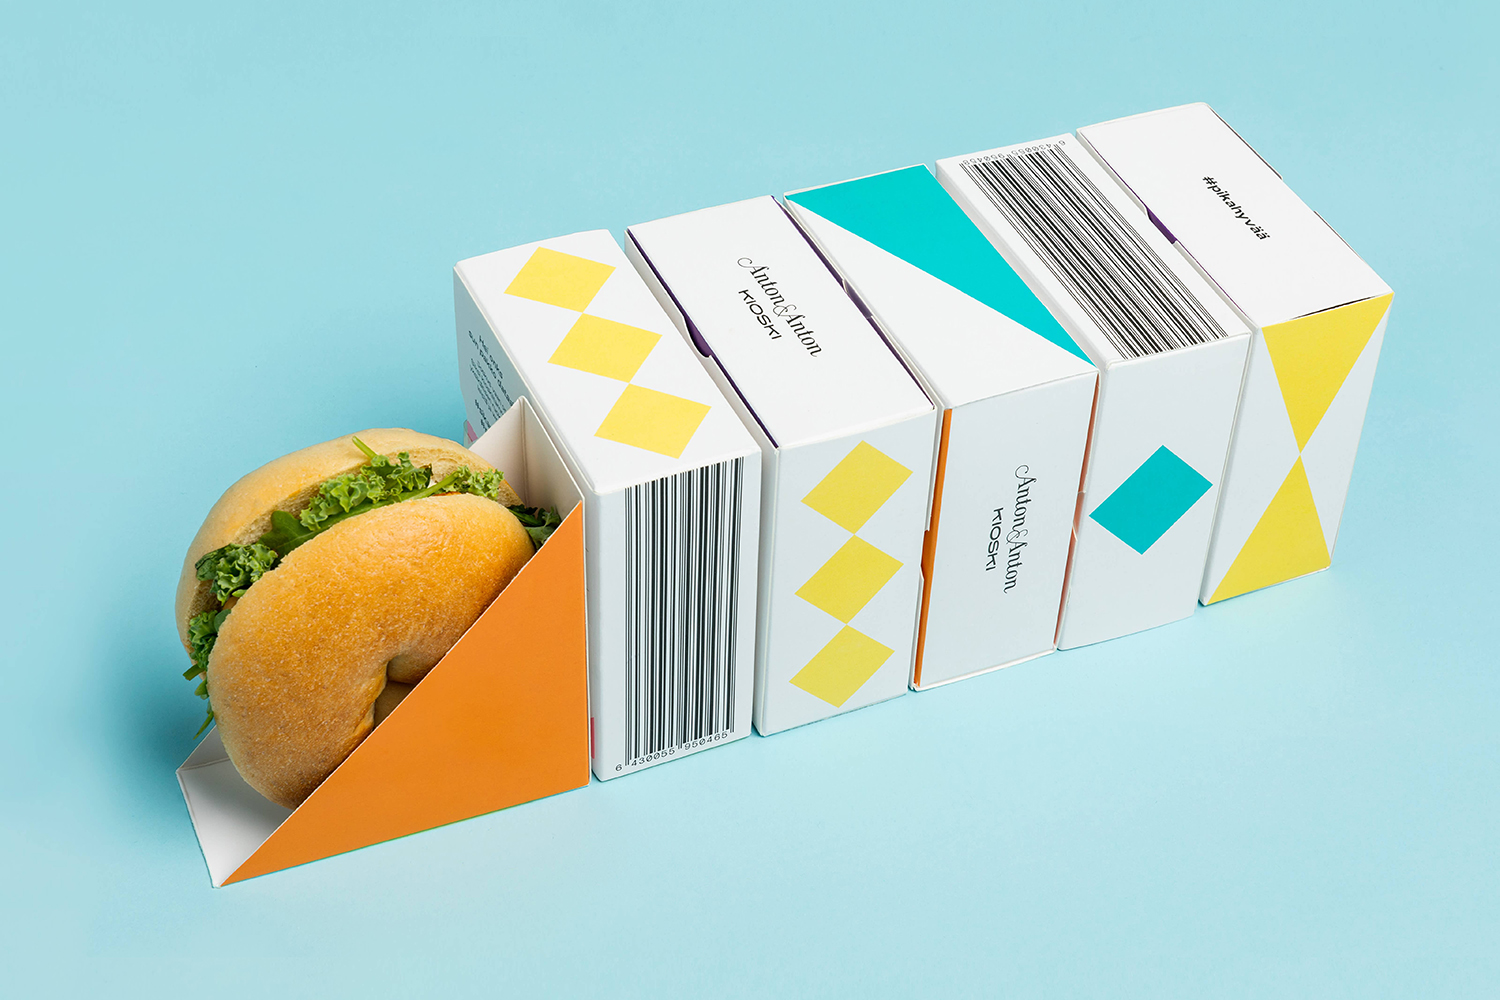 New visual identity and packaging design by Bond for Finnish supermarket and delivery service Anton&Anton Kiosk